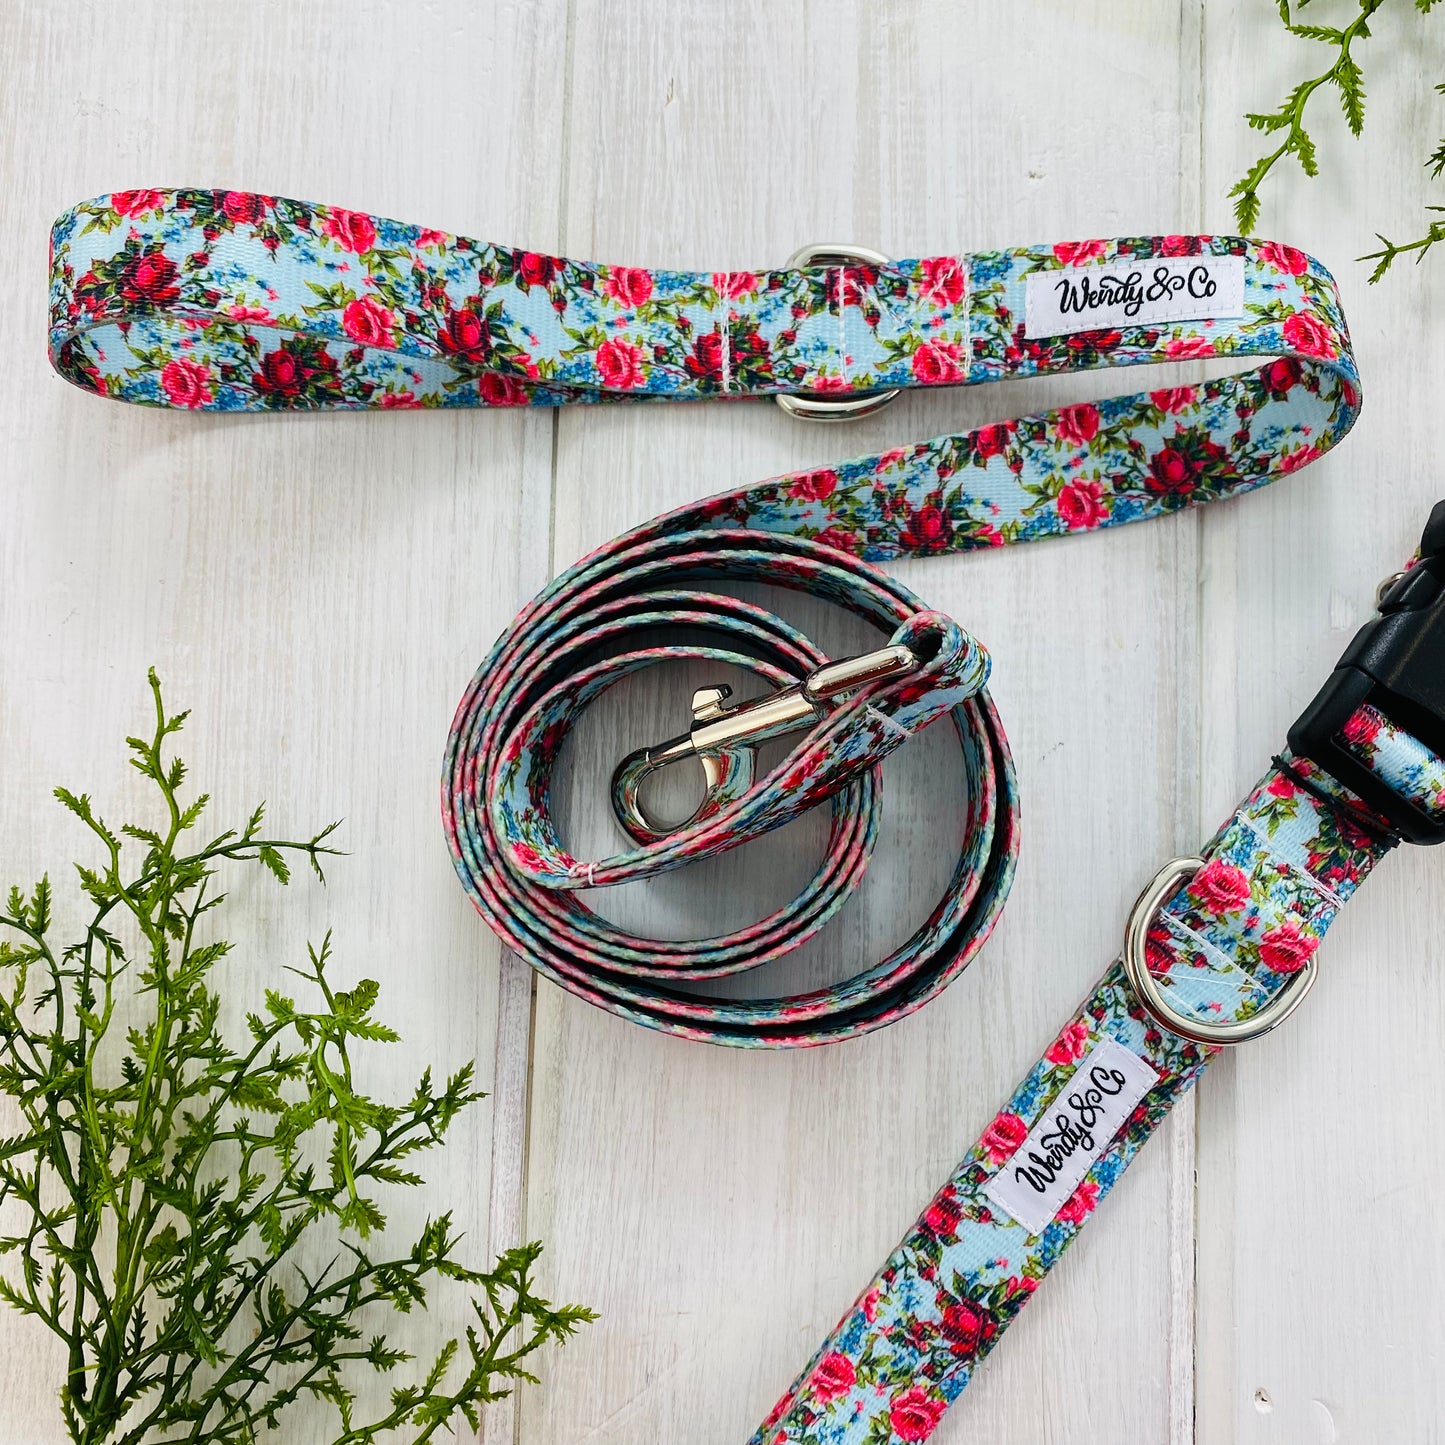 Girly floral dog leash with red roses on blue background.